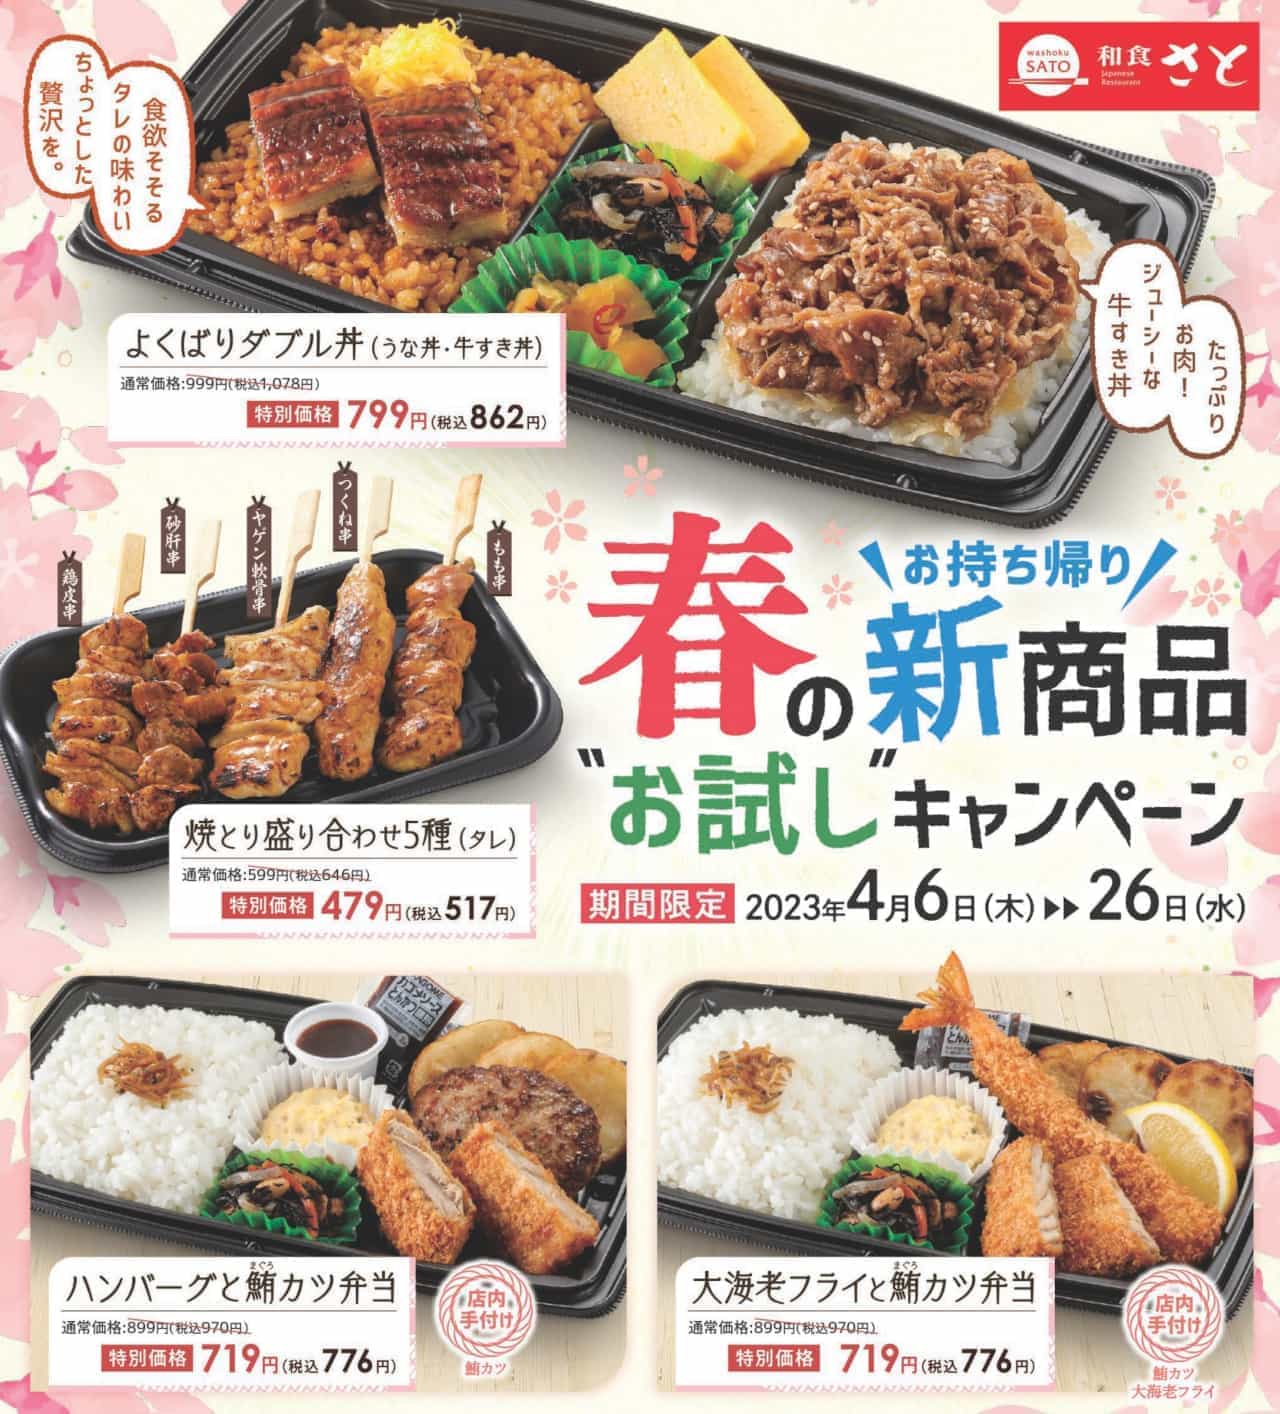 Washoku SATO "Spring New Product Tasting Campaign" (Japanese only)